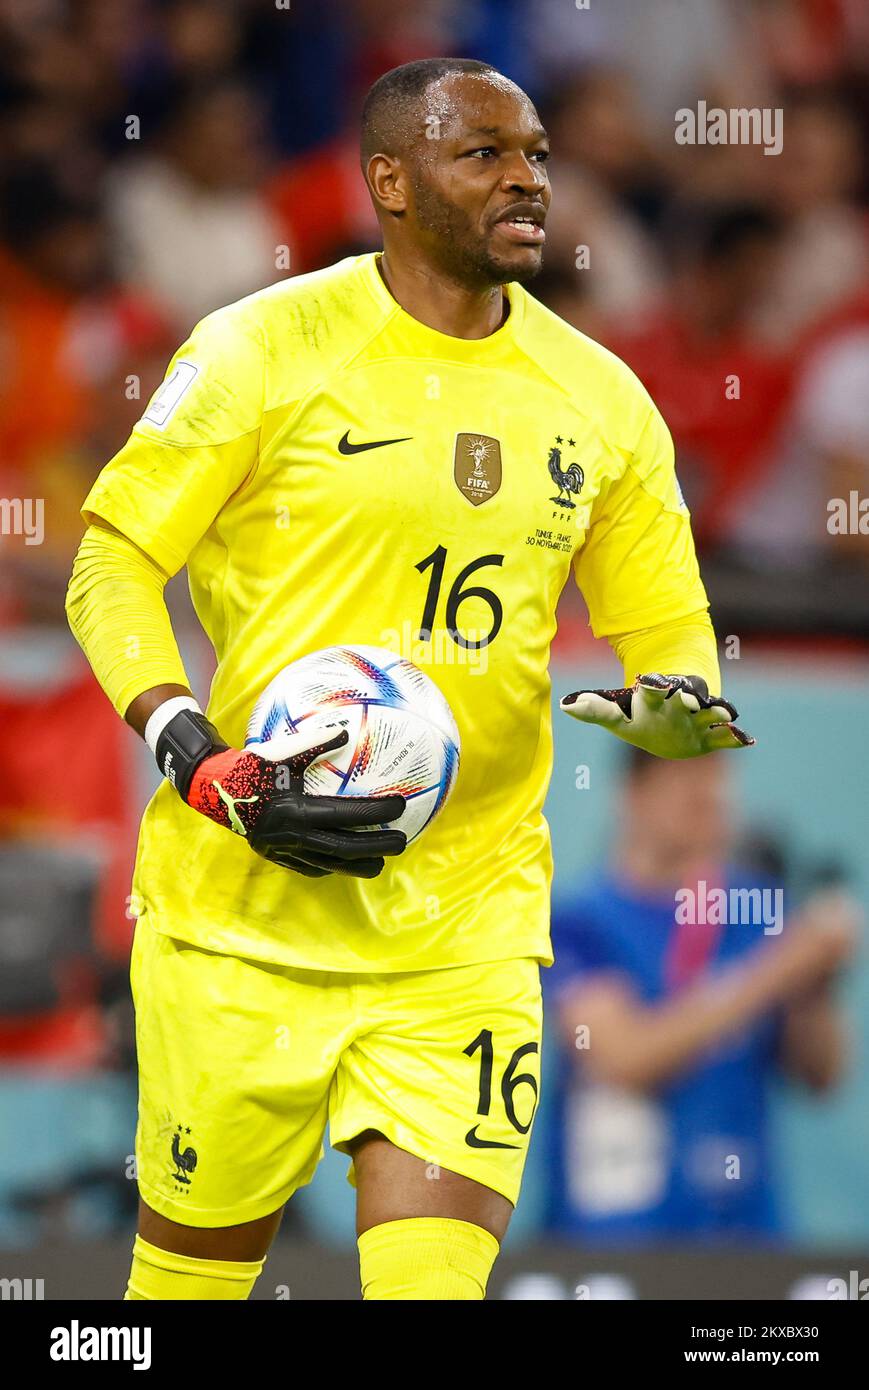 Doha, Qatar. 30th Nov, 2022. MANDANDA Steve from France during the match between Tunisia and France, valid for the group stage of the World Cup, held at the Education City Stadium in Doha, Qatar. Credit: Rodolfo Buhrer/La Imagem/FotoArena/Alamy Live News Credit: Foto Arena LTDA/Alamy Live News Stock Photo